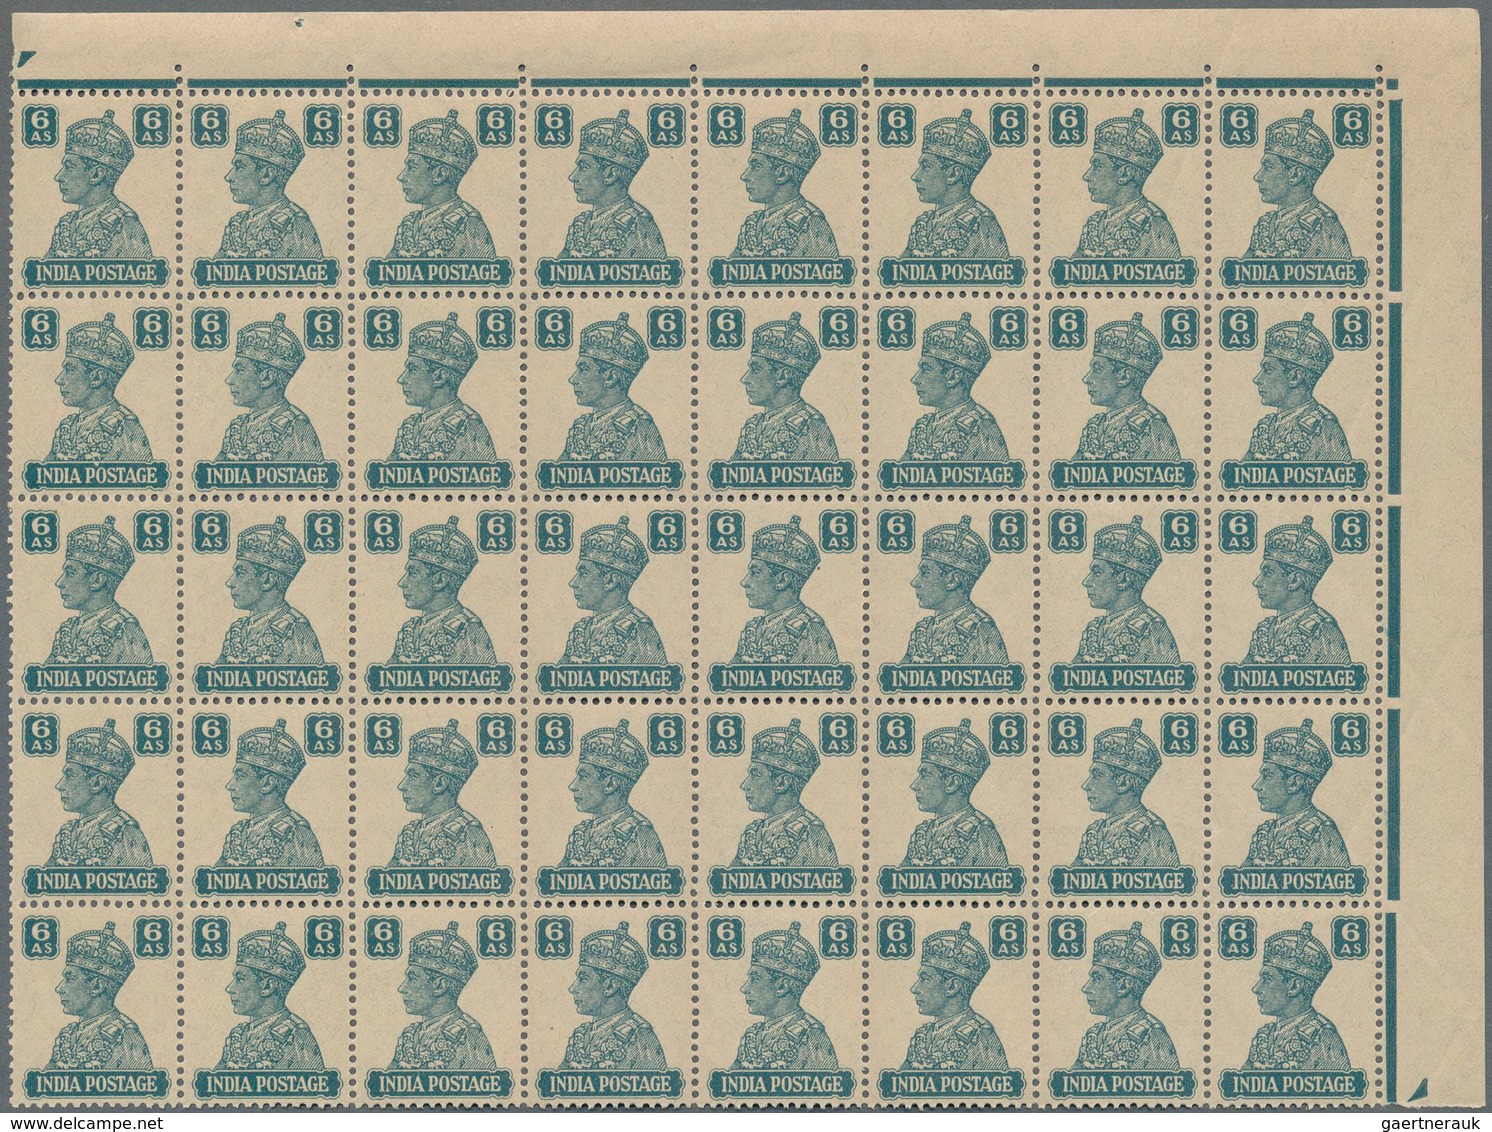 Indien: 1940-41, KGVI. 4a., 6a., 8a. and 12a. each as marginal block of 40, the 6a., 8a. and 12a. as